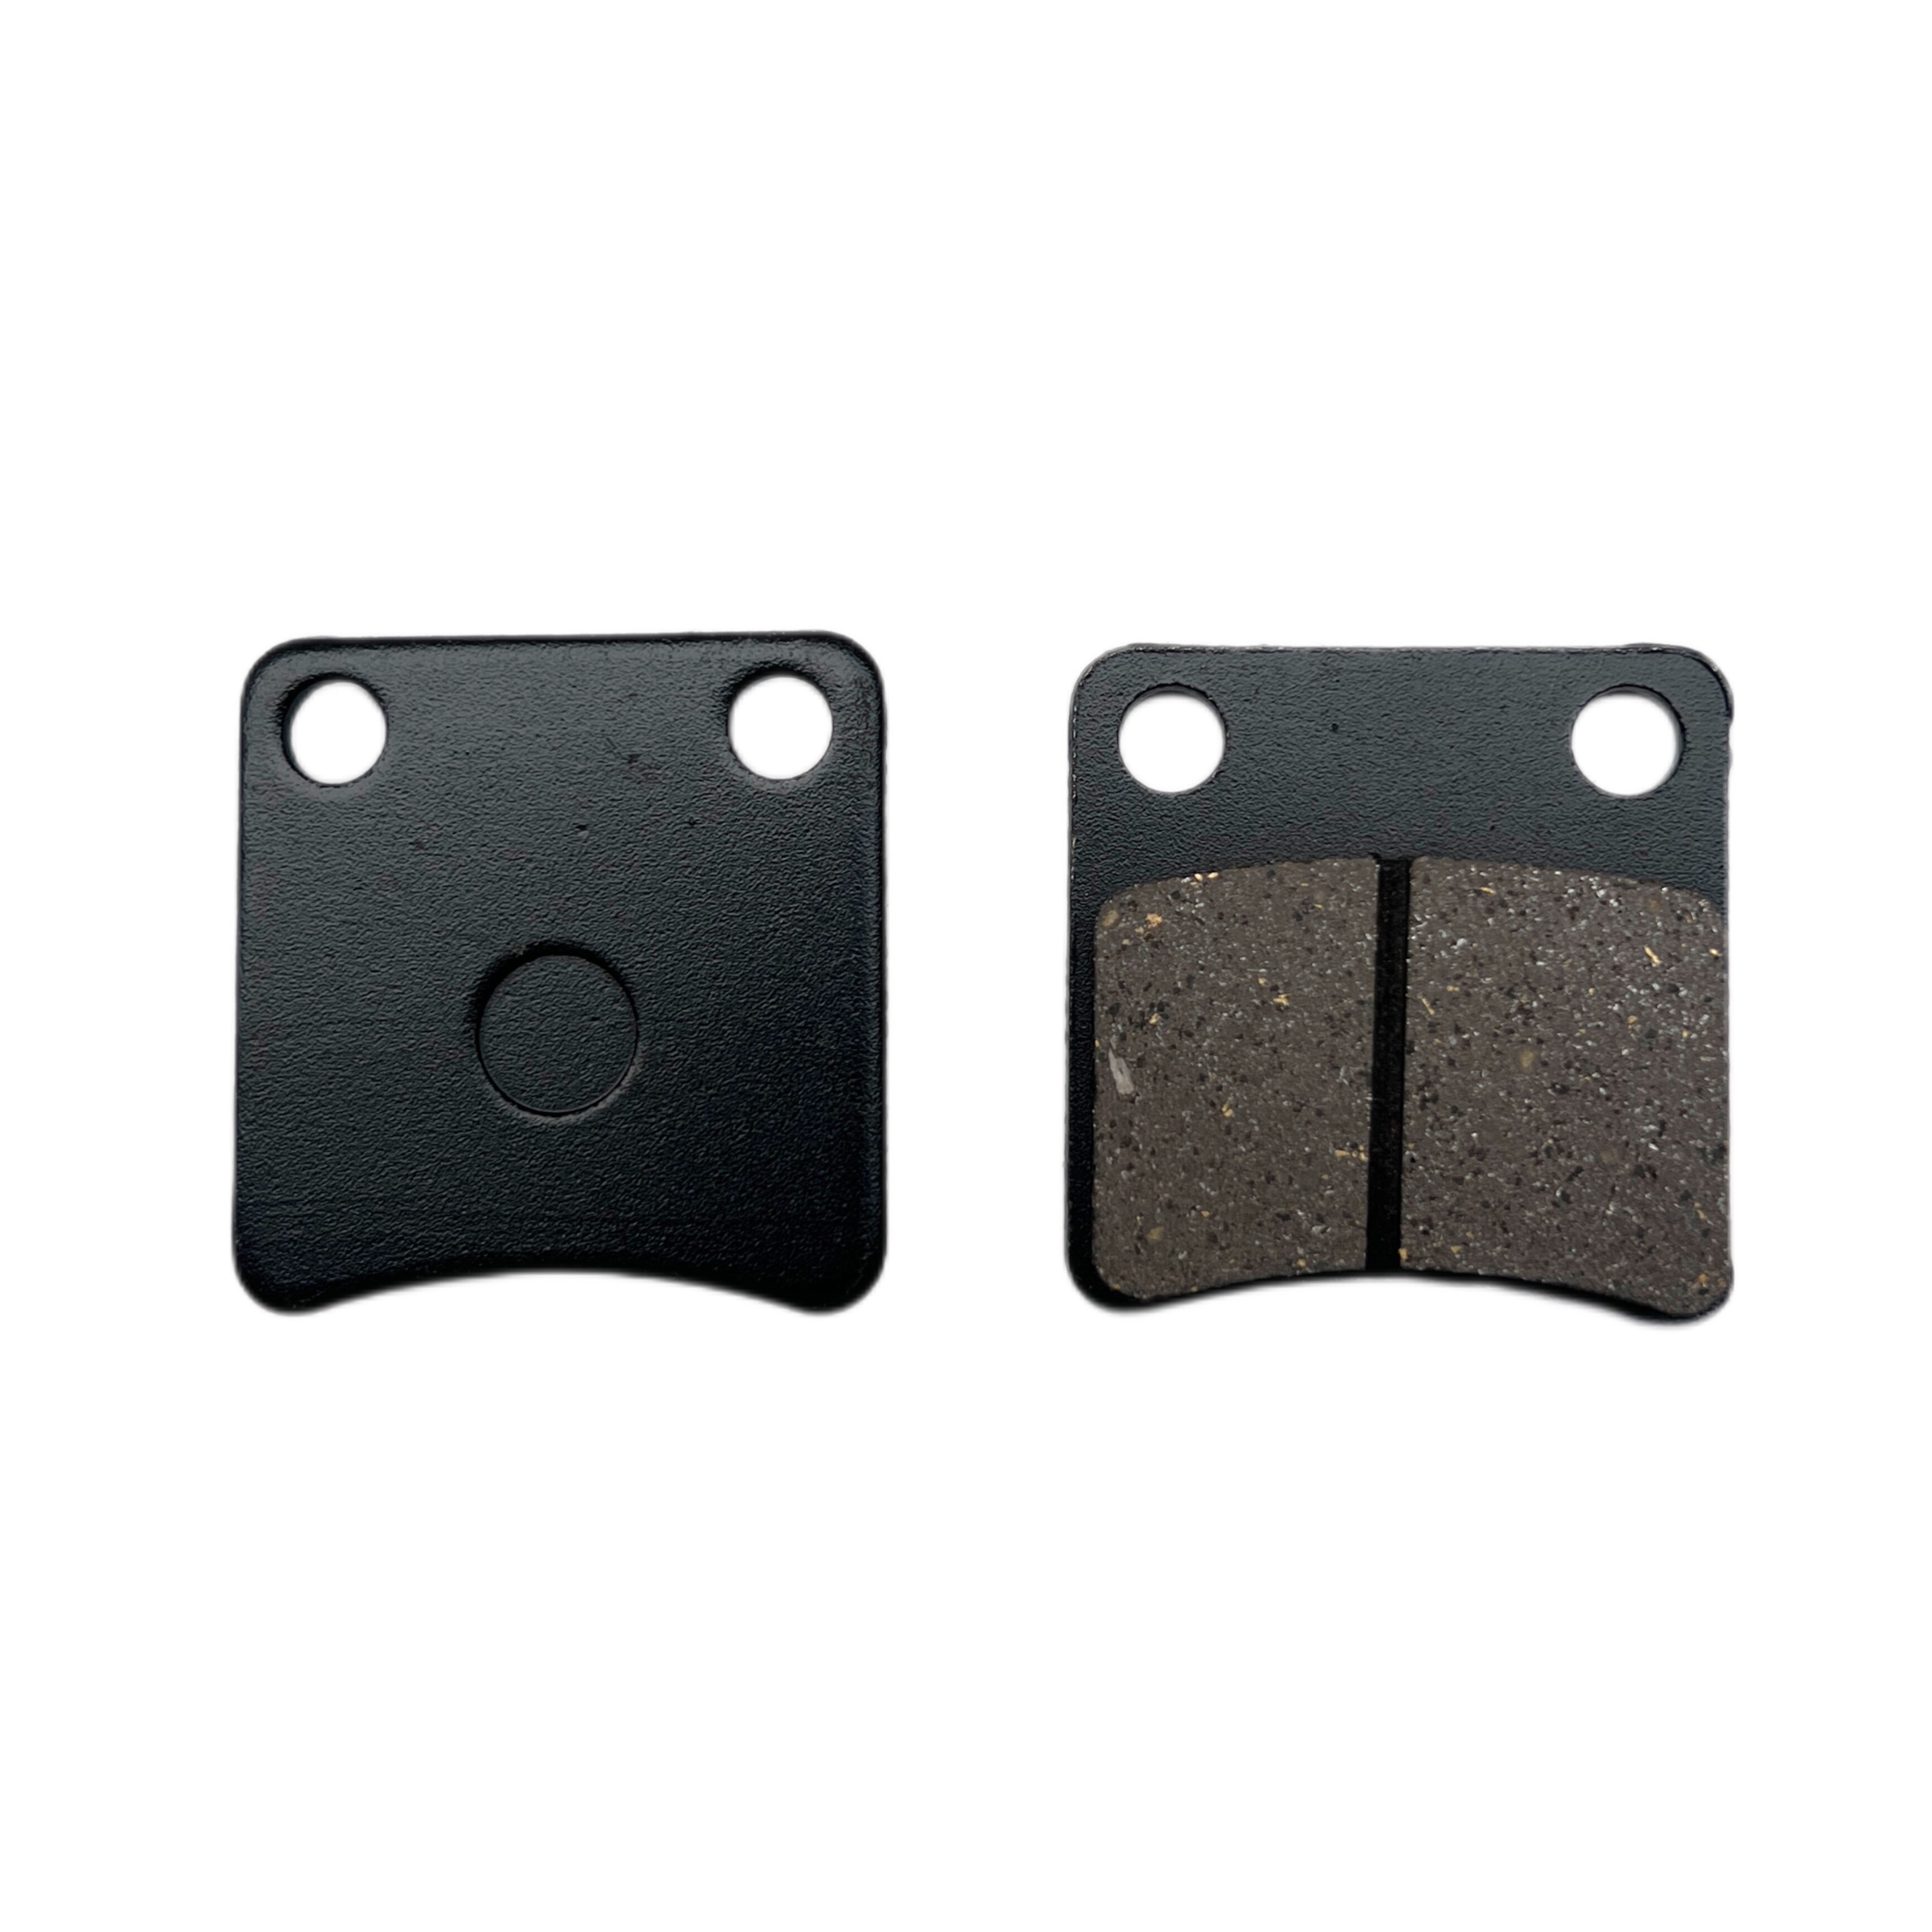 Brake Pads - GY6 125 Scooter